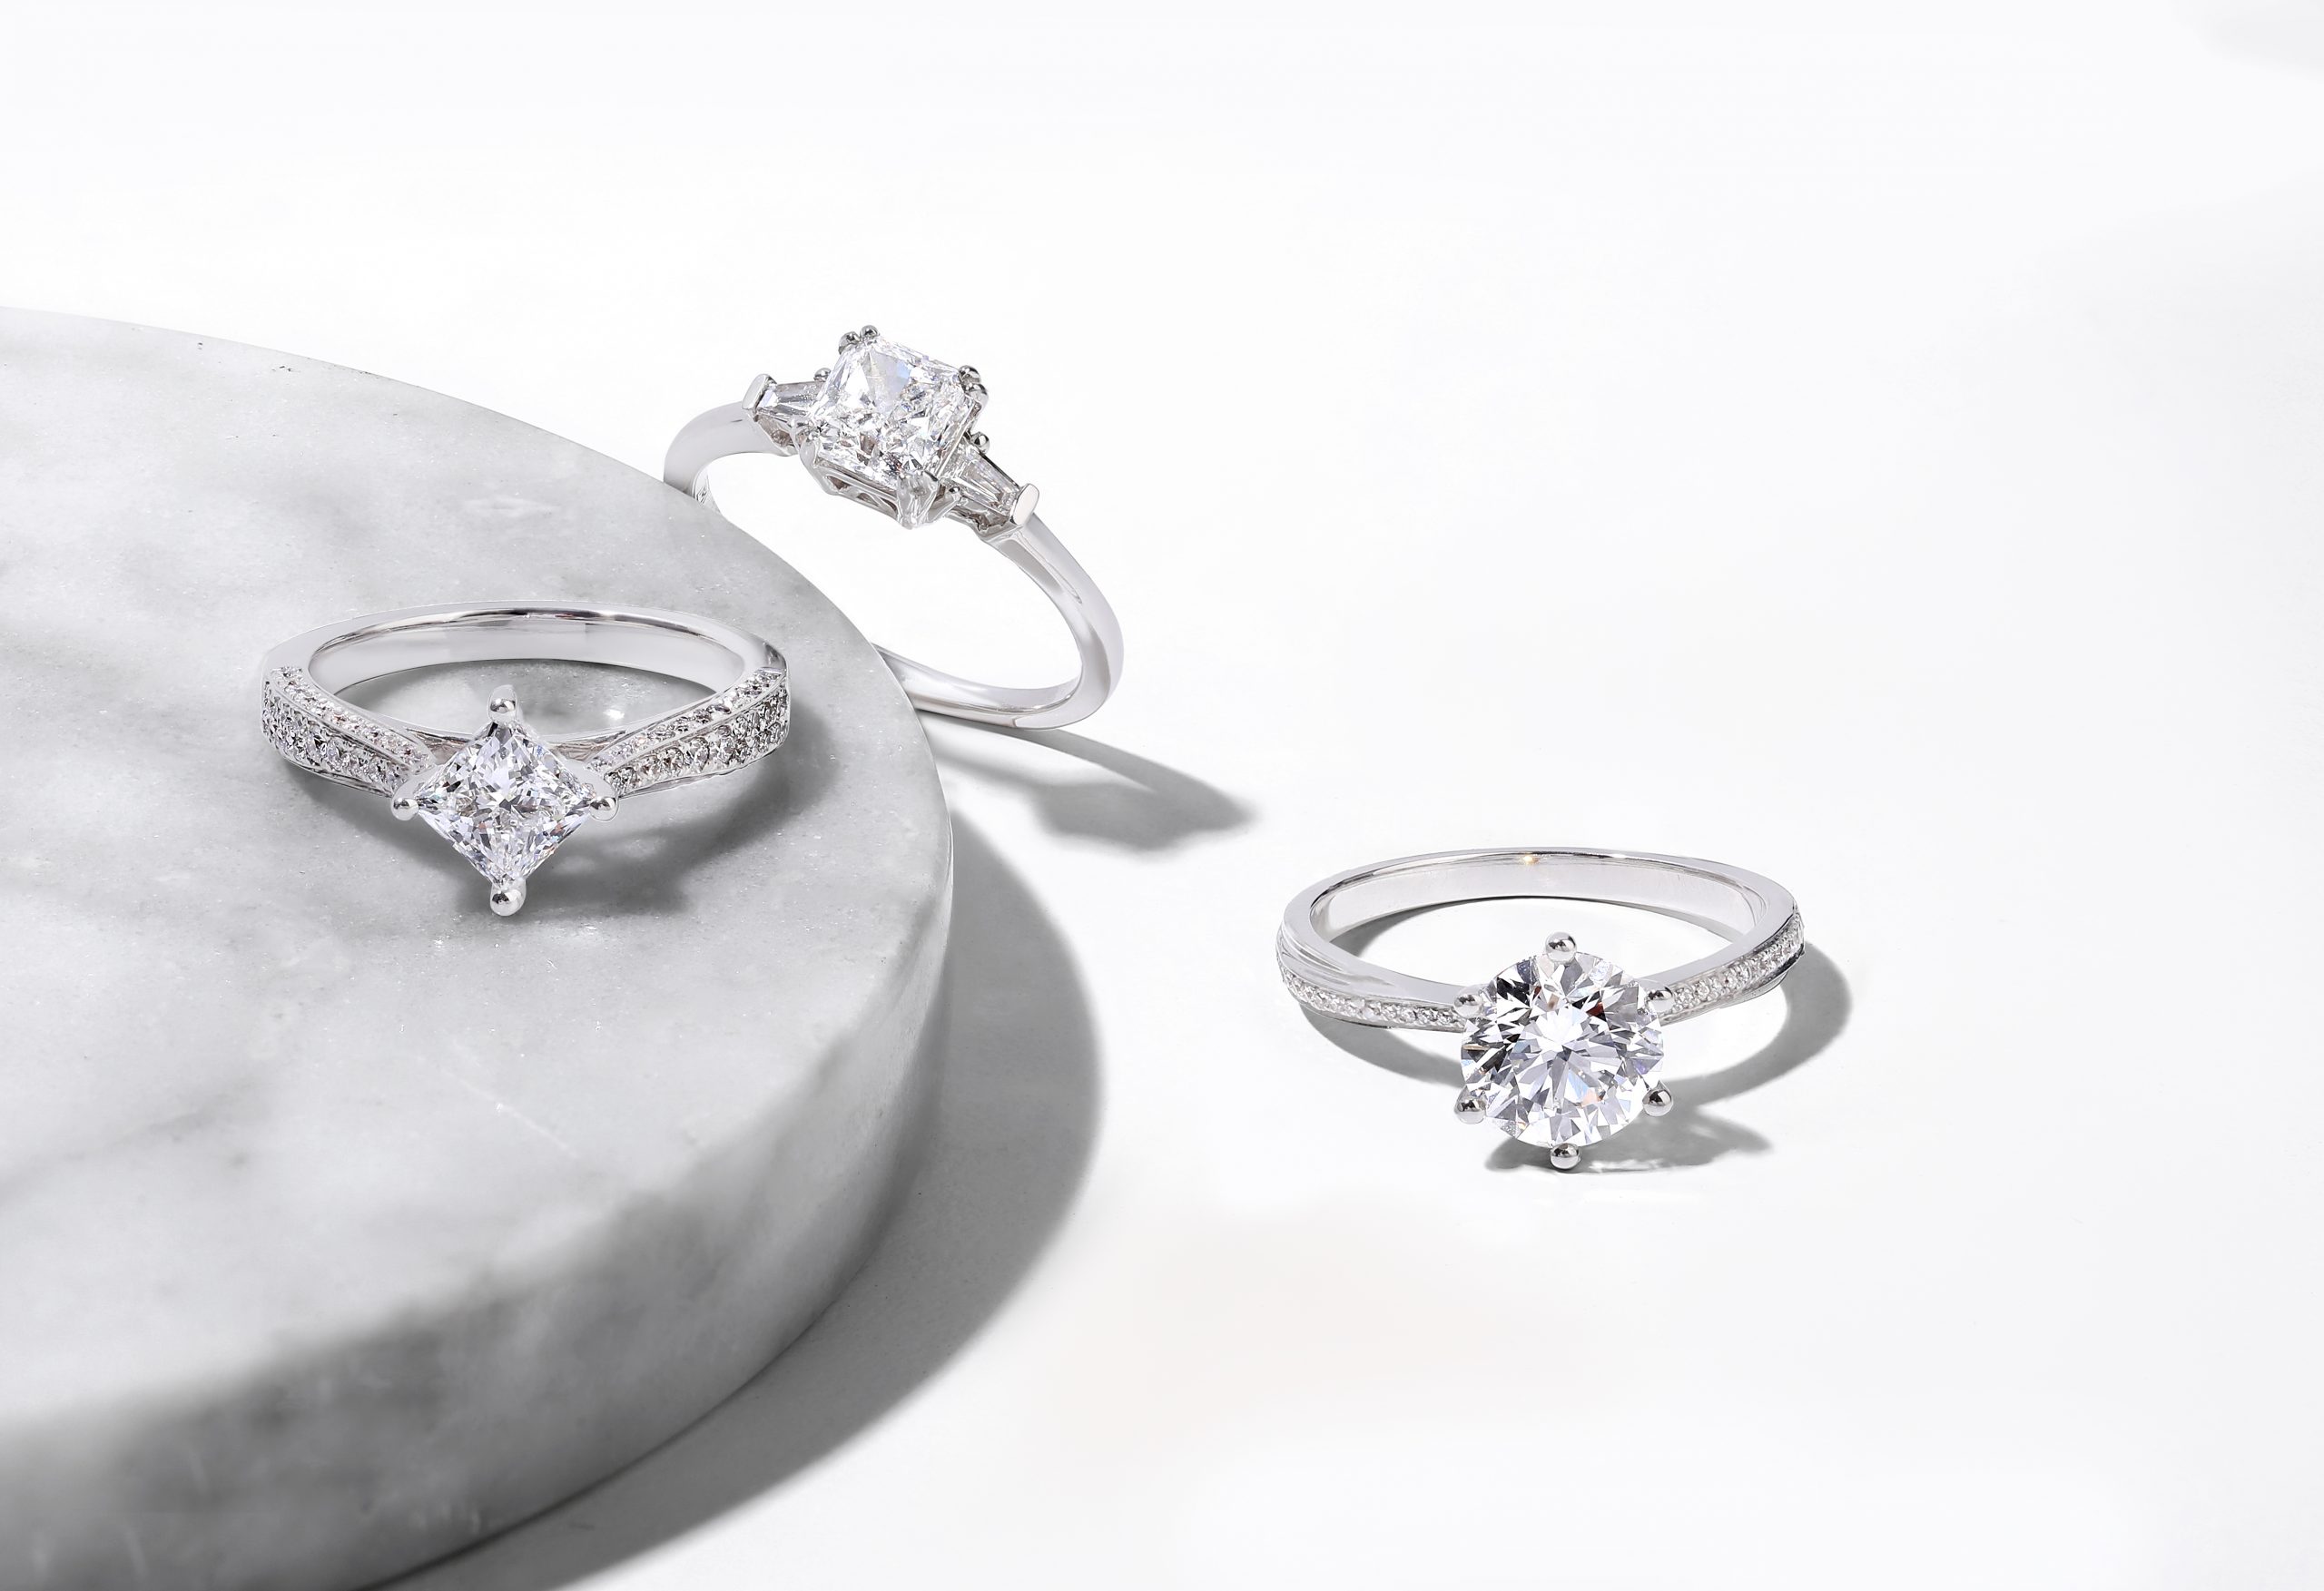 Types of Diamond Cuts - How to Choose The Right Shape – Padis Jewelry